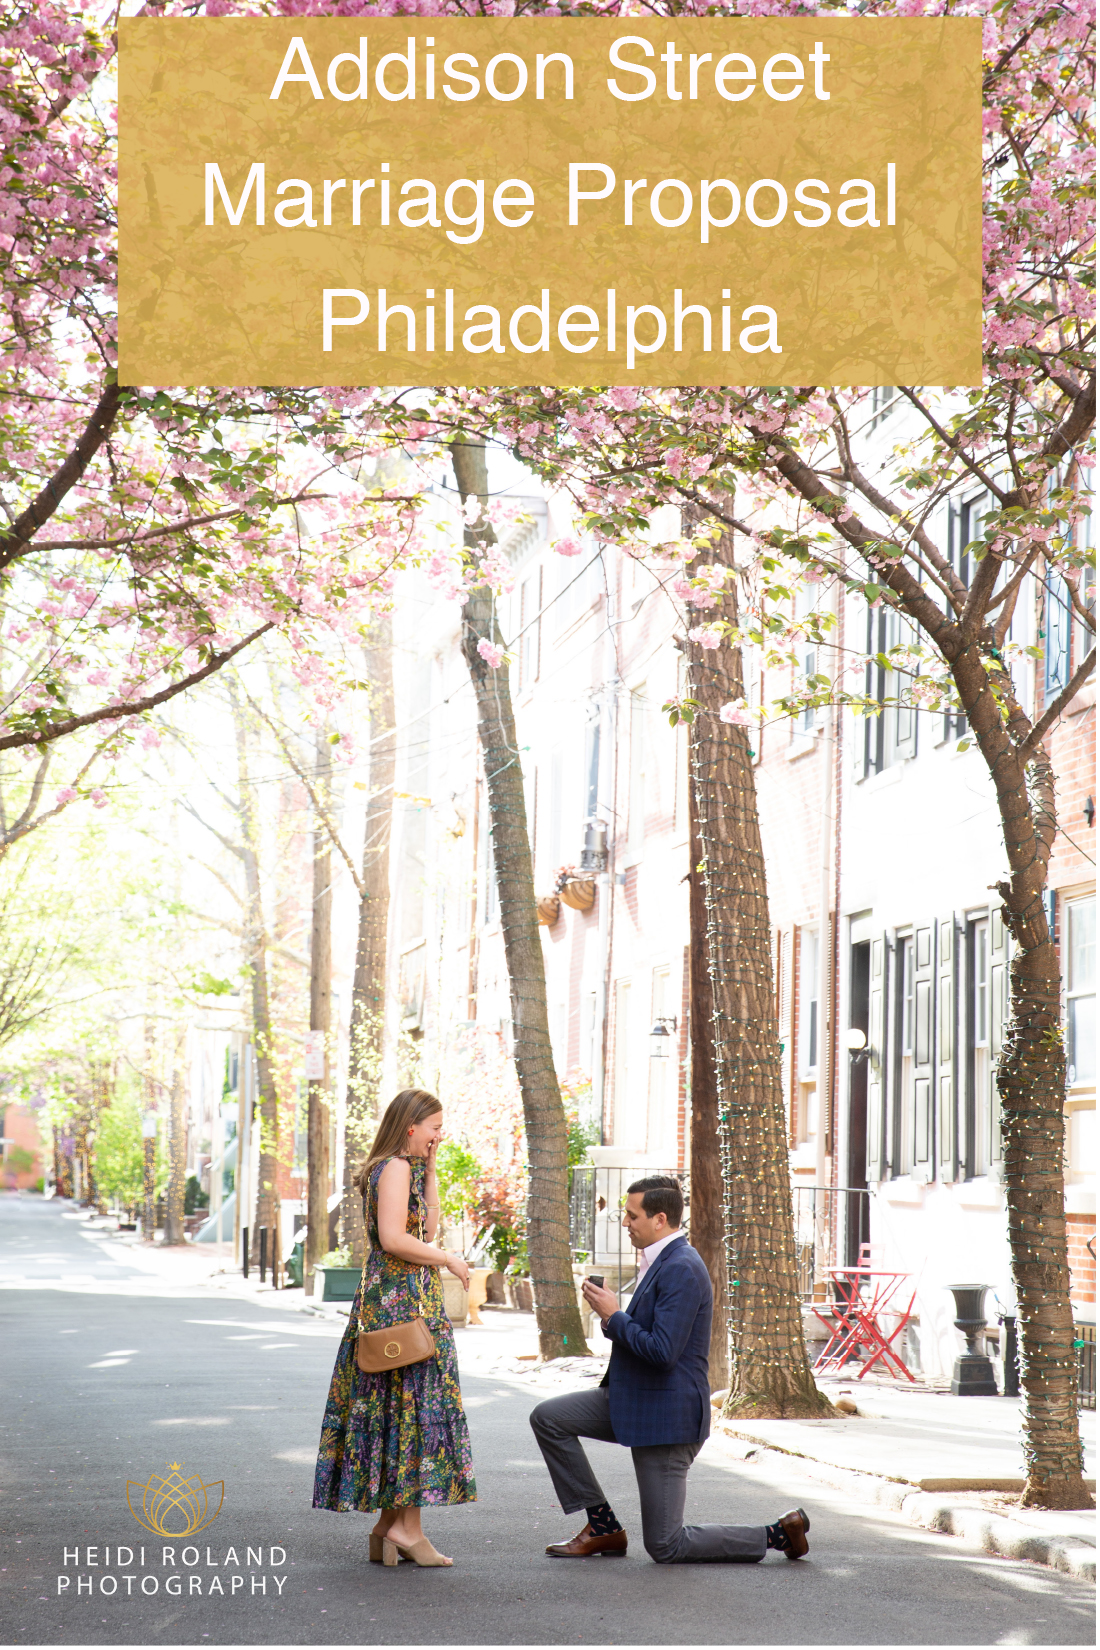 Addison Street Cherry Blossom Marriage Proposal in Philadelphia by Heidi Roland Photography